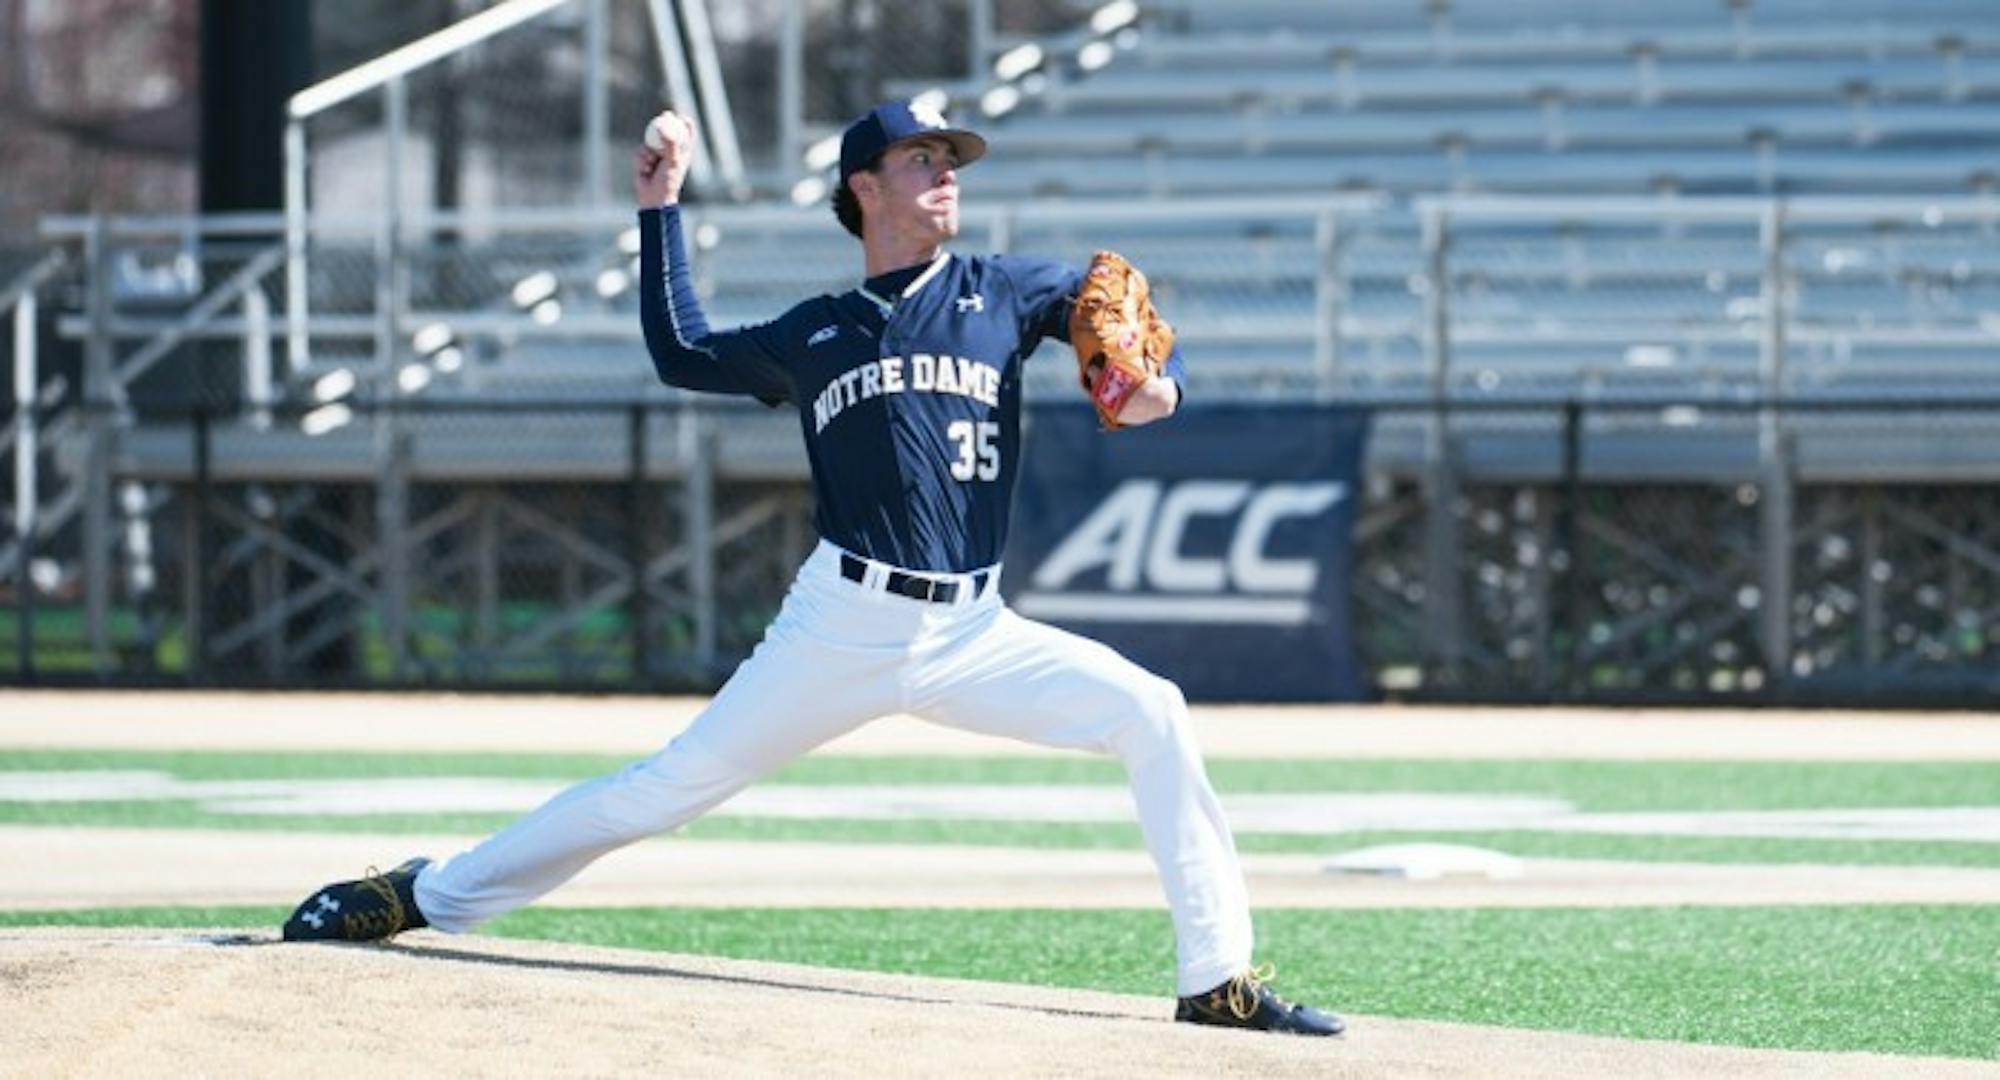 Sophomore pitcher Peter Solomon delivers a pitch during the Irish 10-2 victory over the Demon Deacons on Sunday at Frank Eck Stadium.